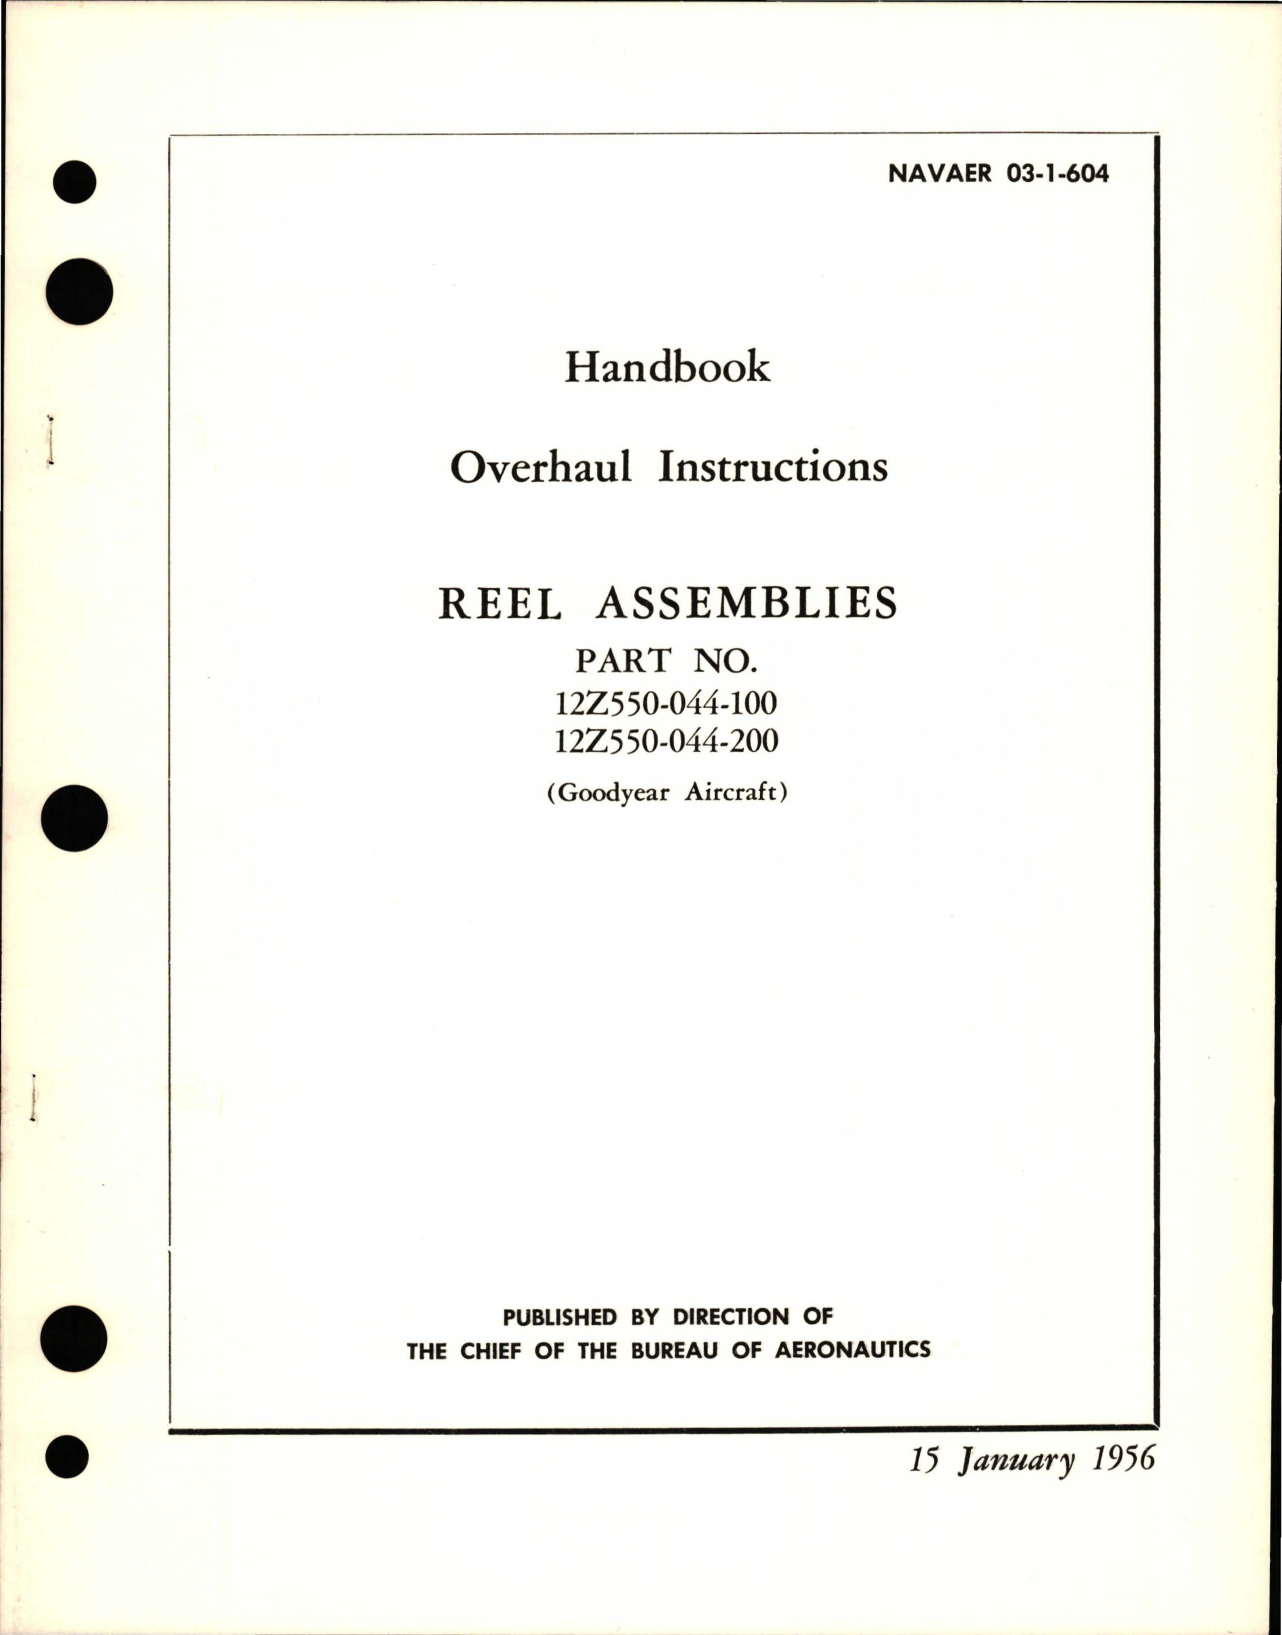 Sample page 1 from AirCorps Library document: Overhaul Instructions for Reel Assemblies - Parts 12Z550-044-100 and 12Z550-044-200